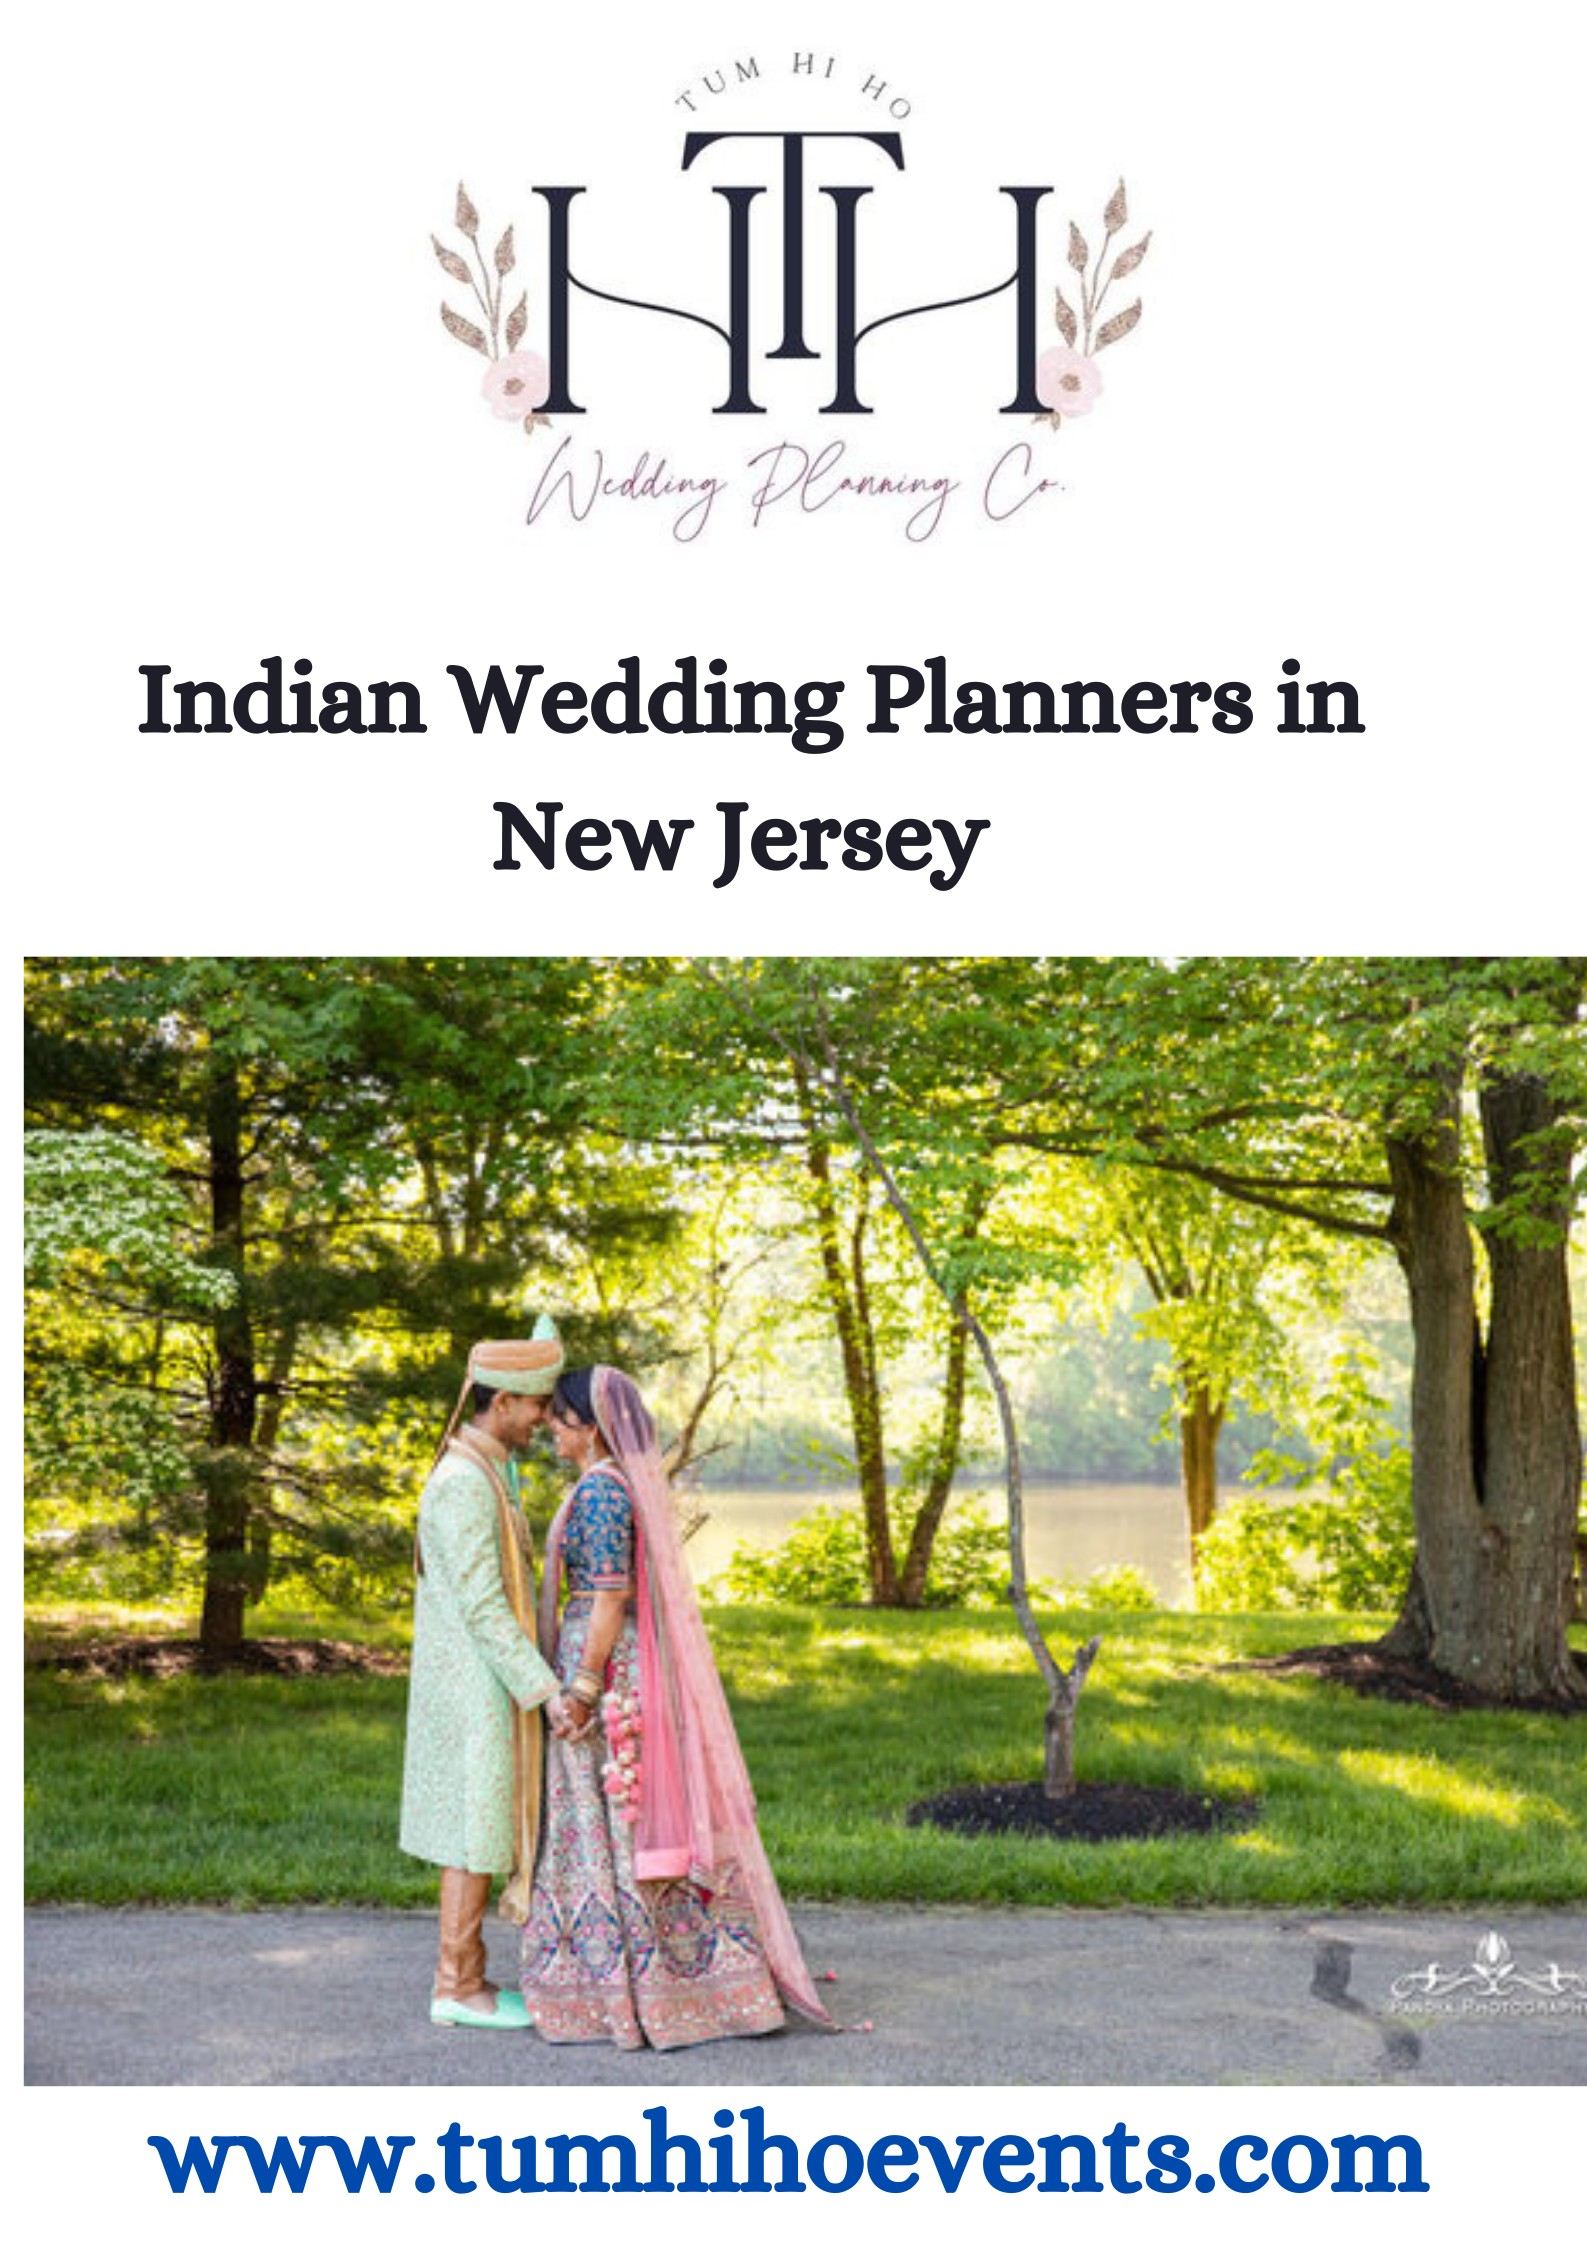 Indian Wedding Planners in New Jersey